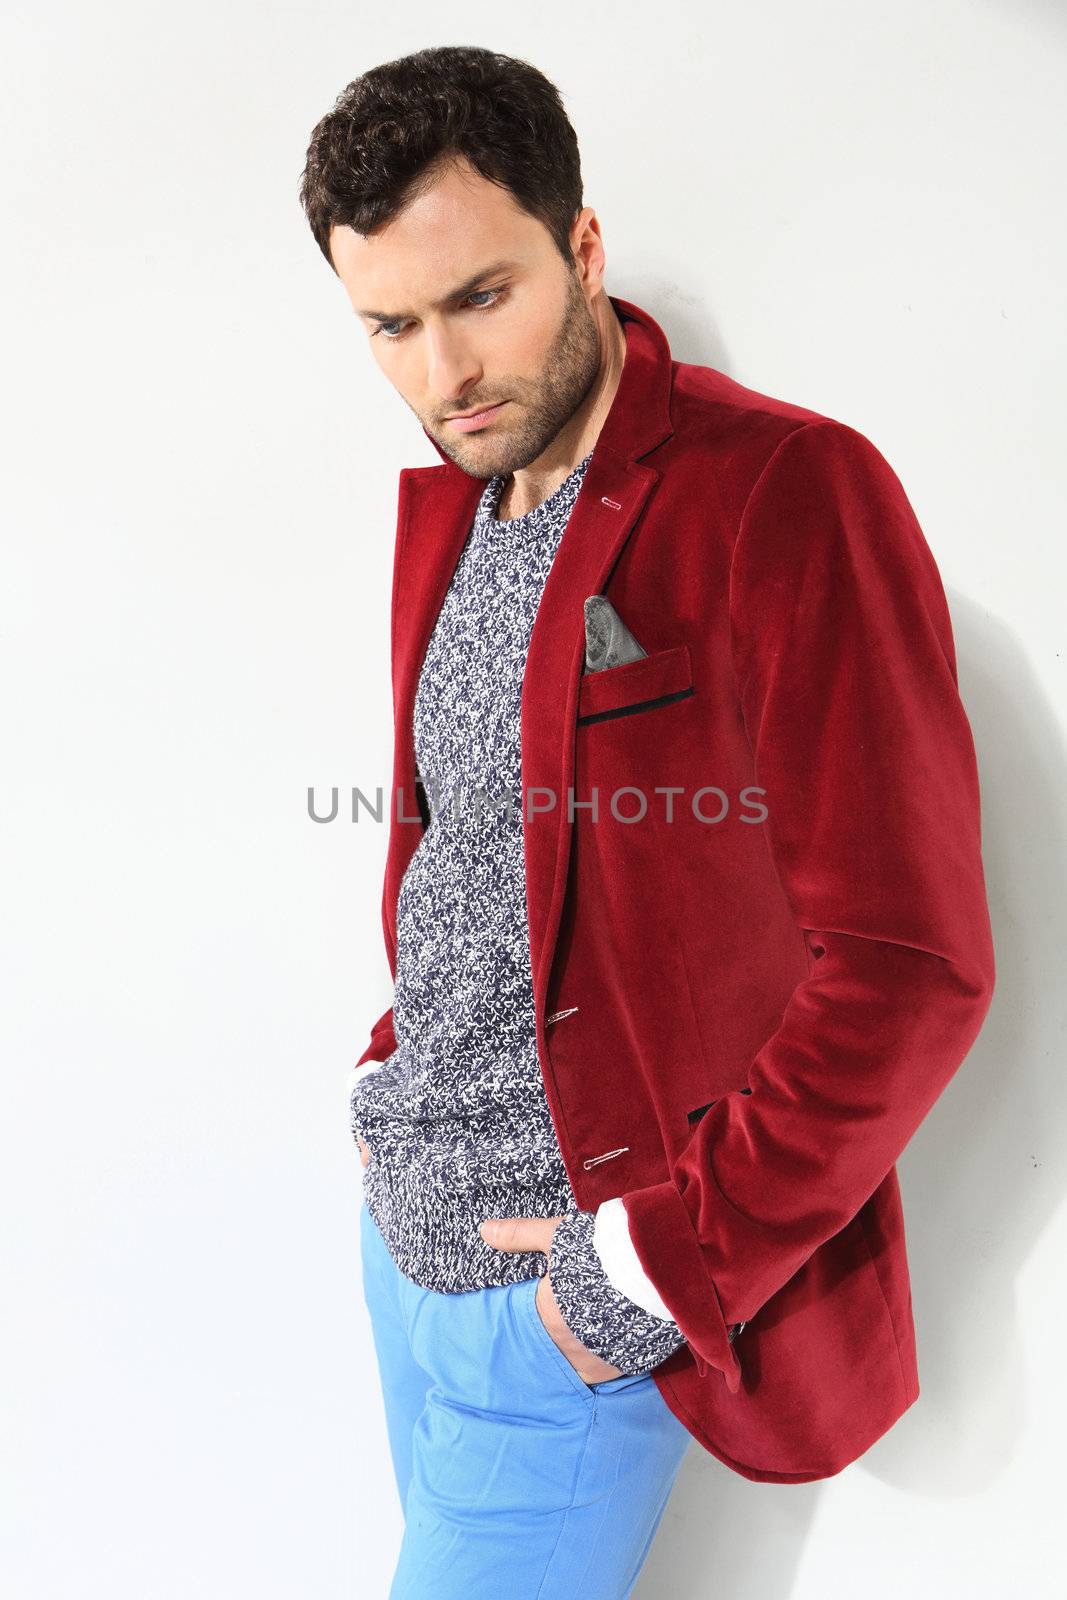 Handsome man posing in a red jacket by robert_przybysz